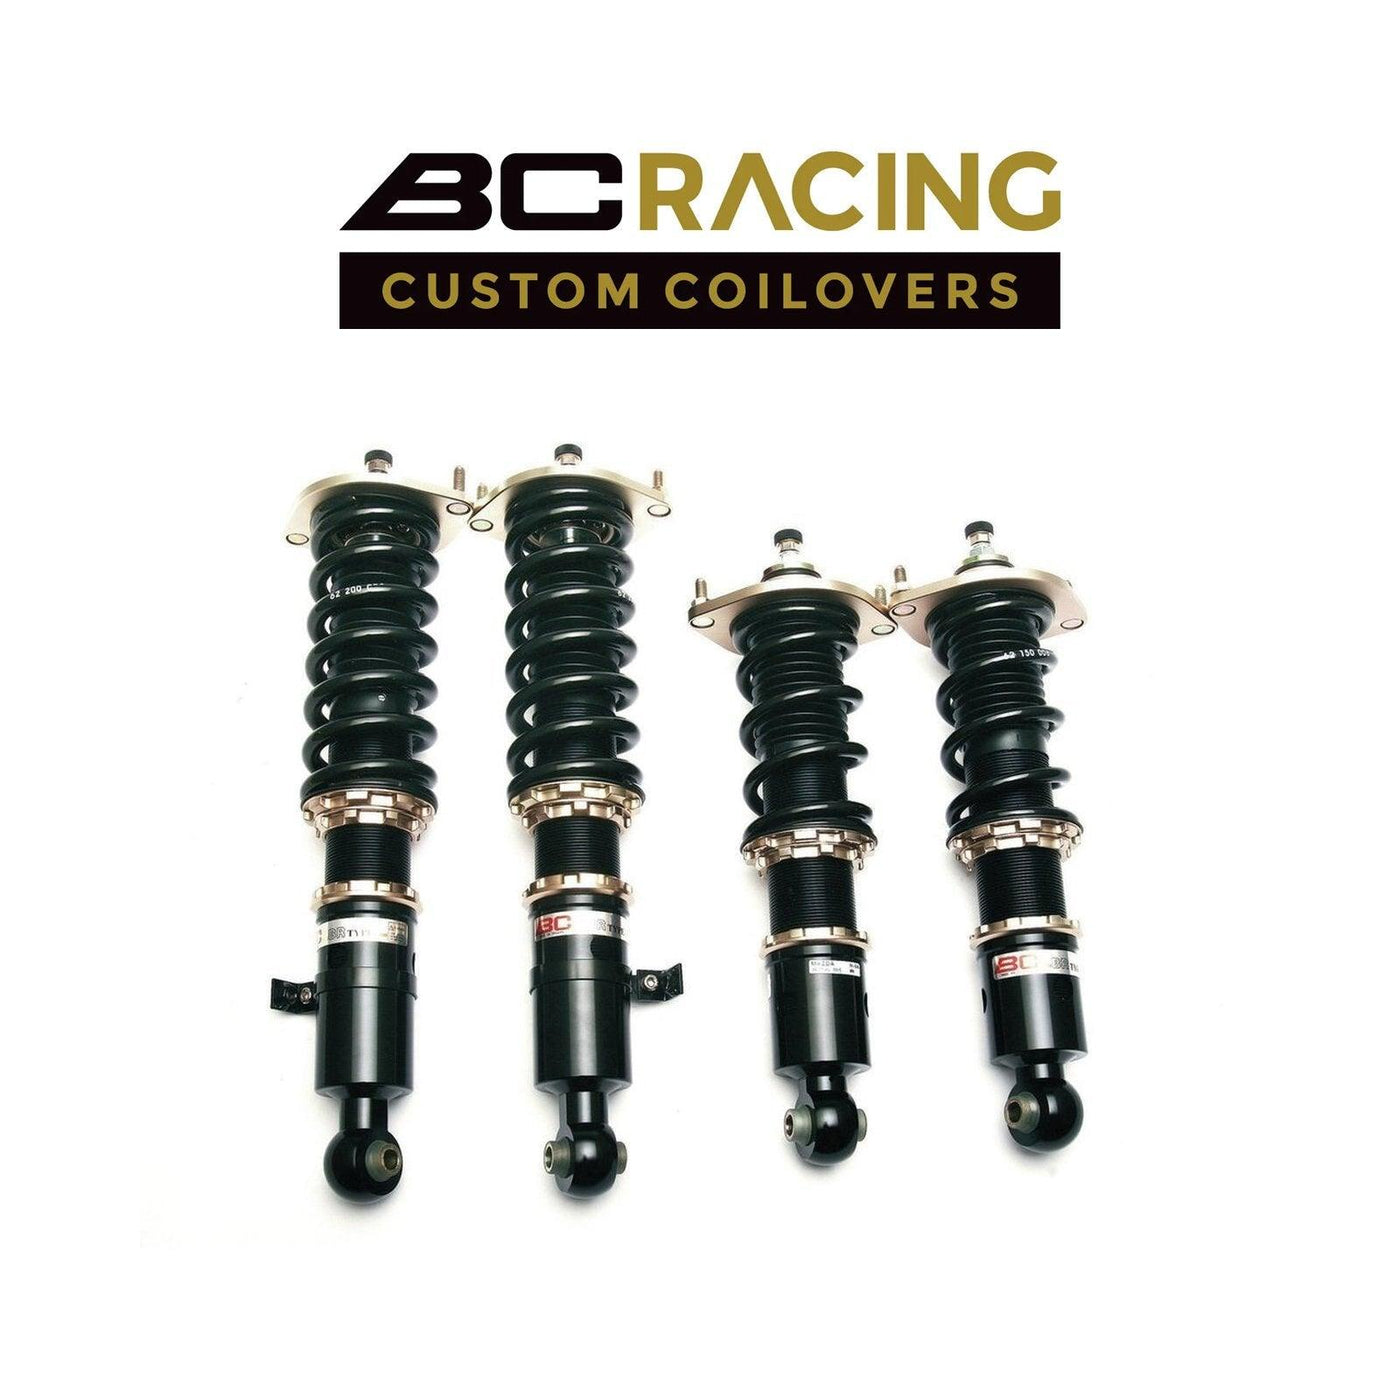 BC Racing Coilovers 2019- TOYOTA Corolla Sedan/Hatch - Attacking the Clock Racing